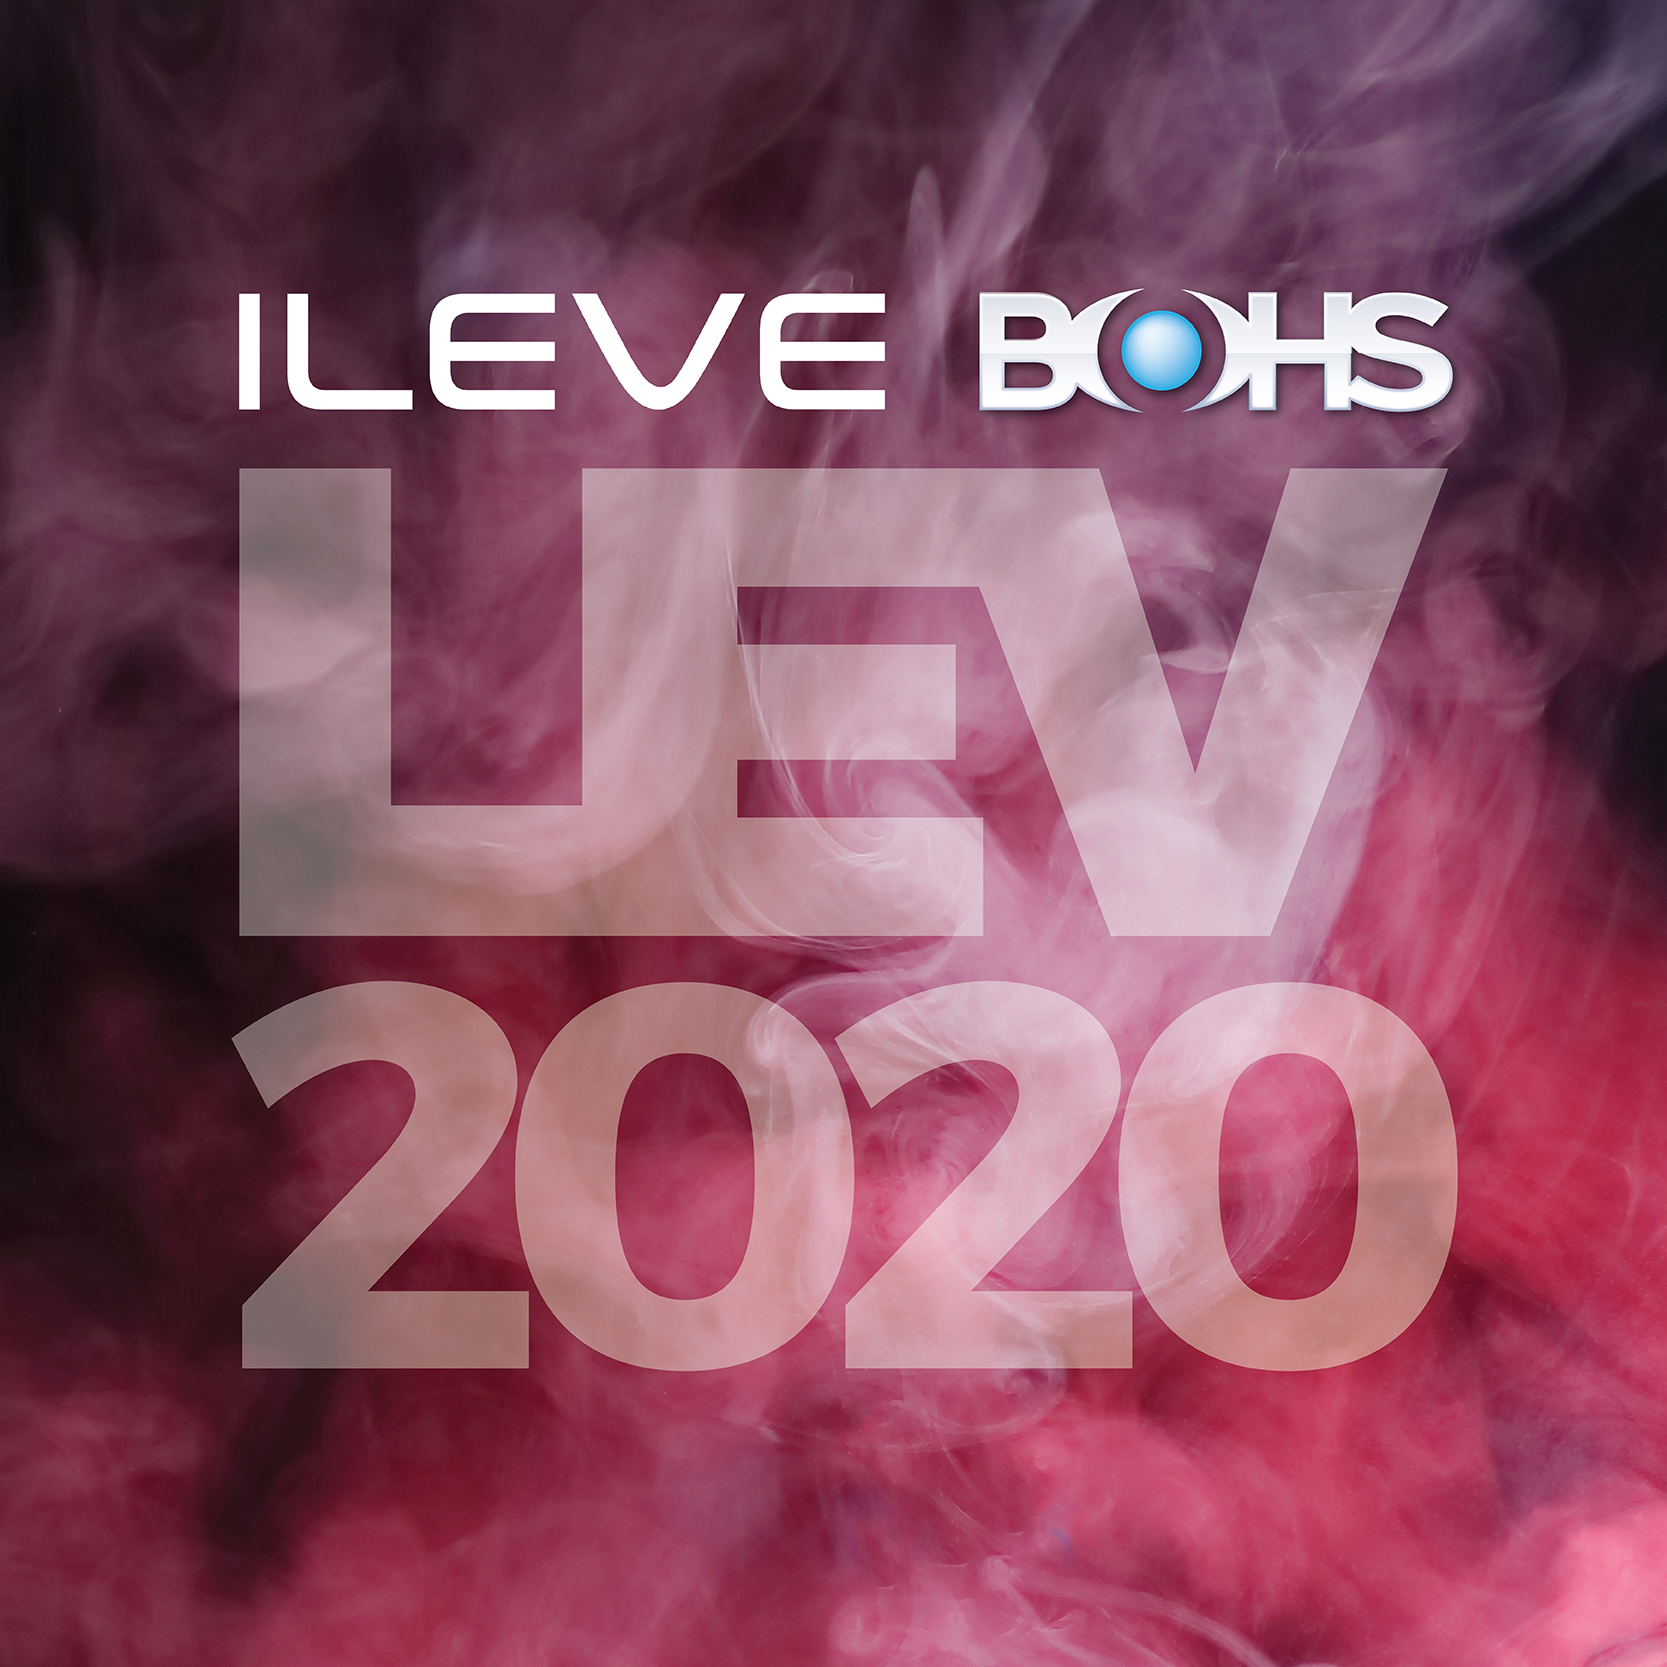 LEV - Extracting the Best Practices 2020